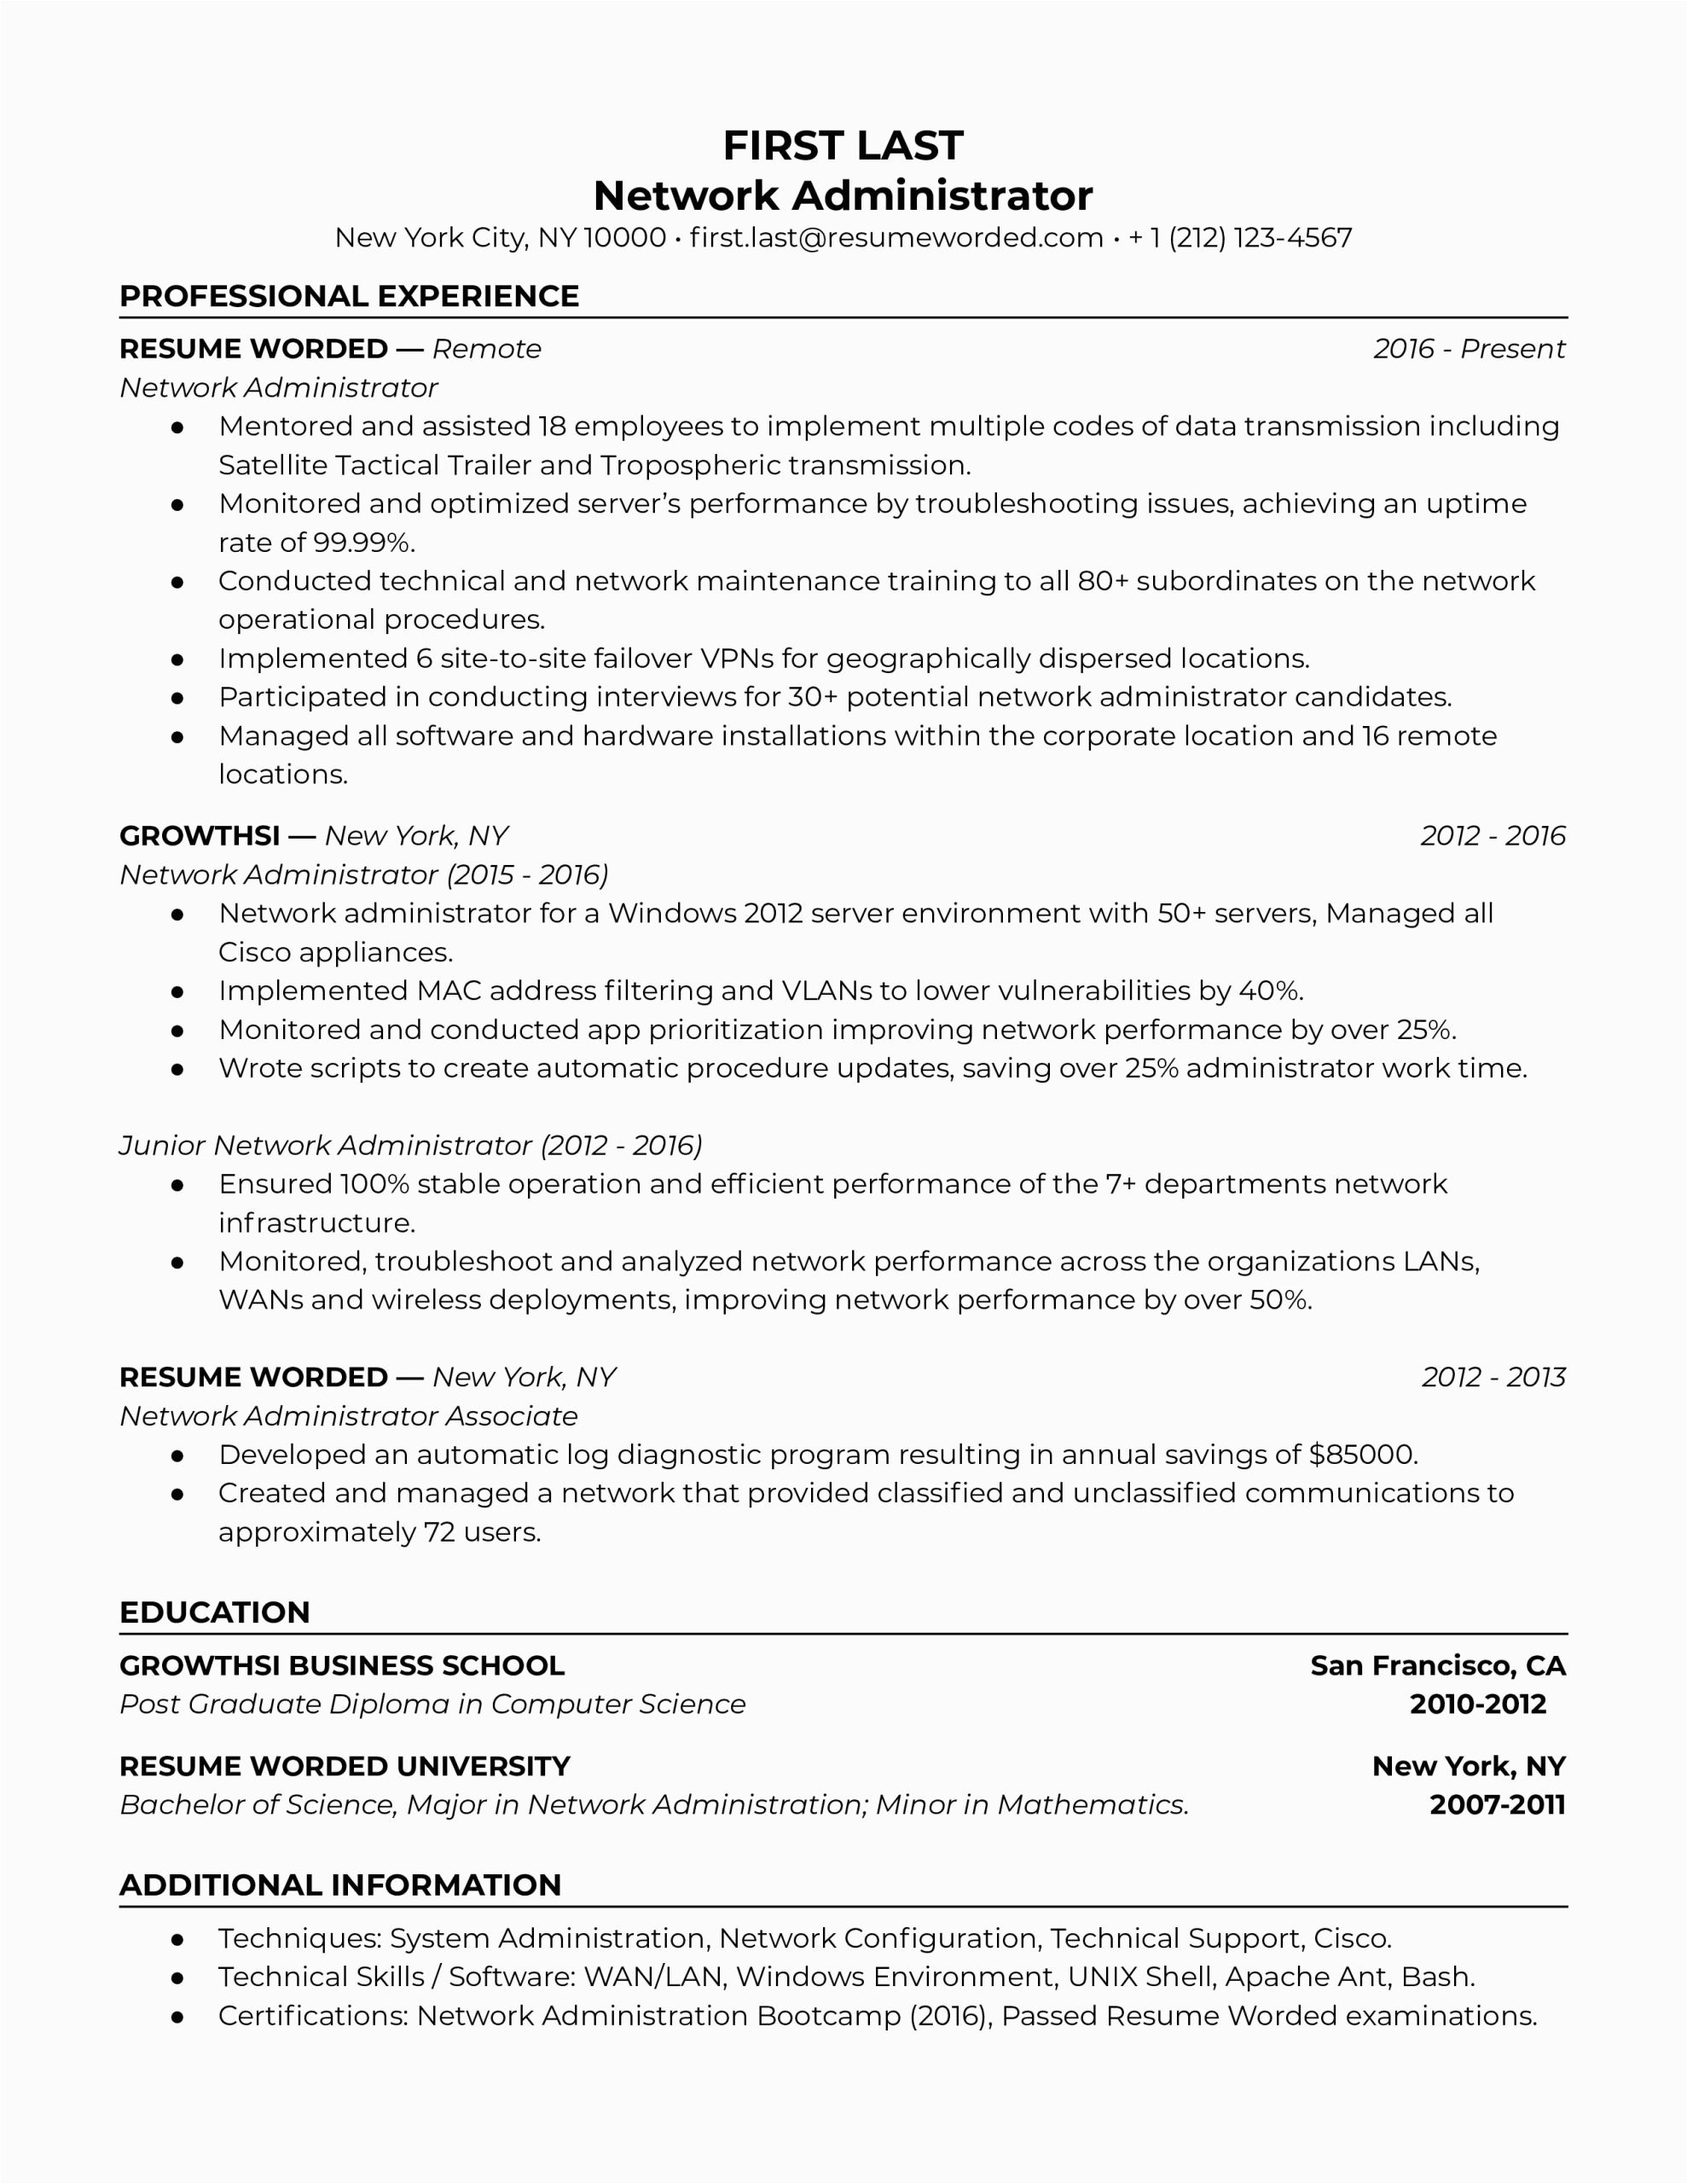 Sample Resume for A Network Administrator 4 Network Administrator Resume Examples for 2021